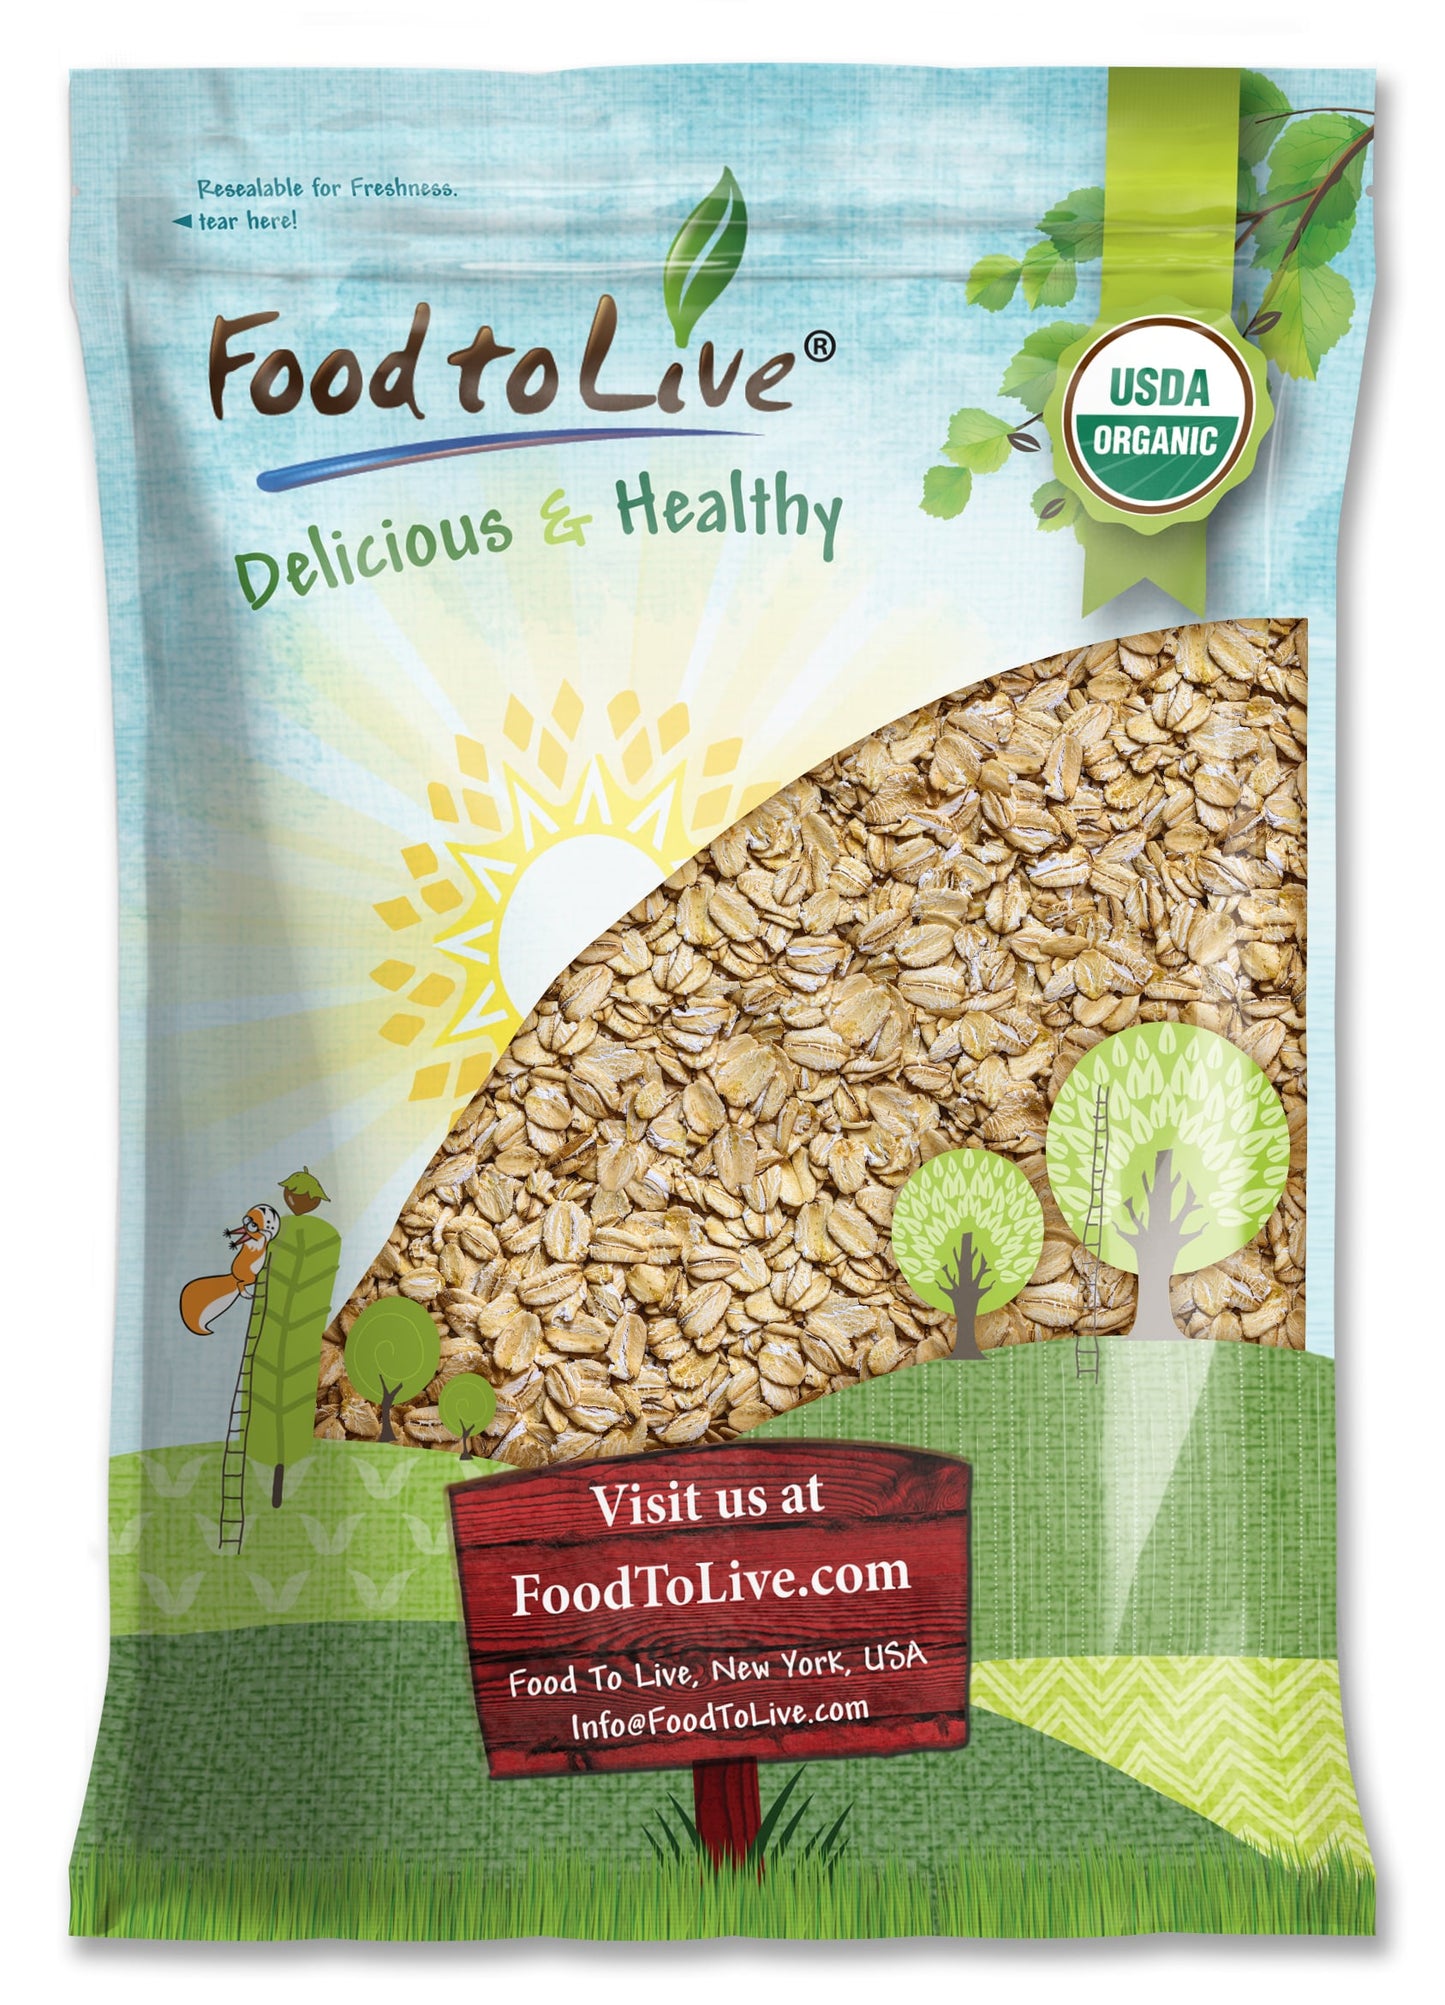 Organic Spelt Flakes - Rolled Spelt Made from Whole Grain Non-GMO Berries, Uncooked, Raw Whole Foods, Vegan, Kosher, Bulk - by Food to Live